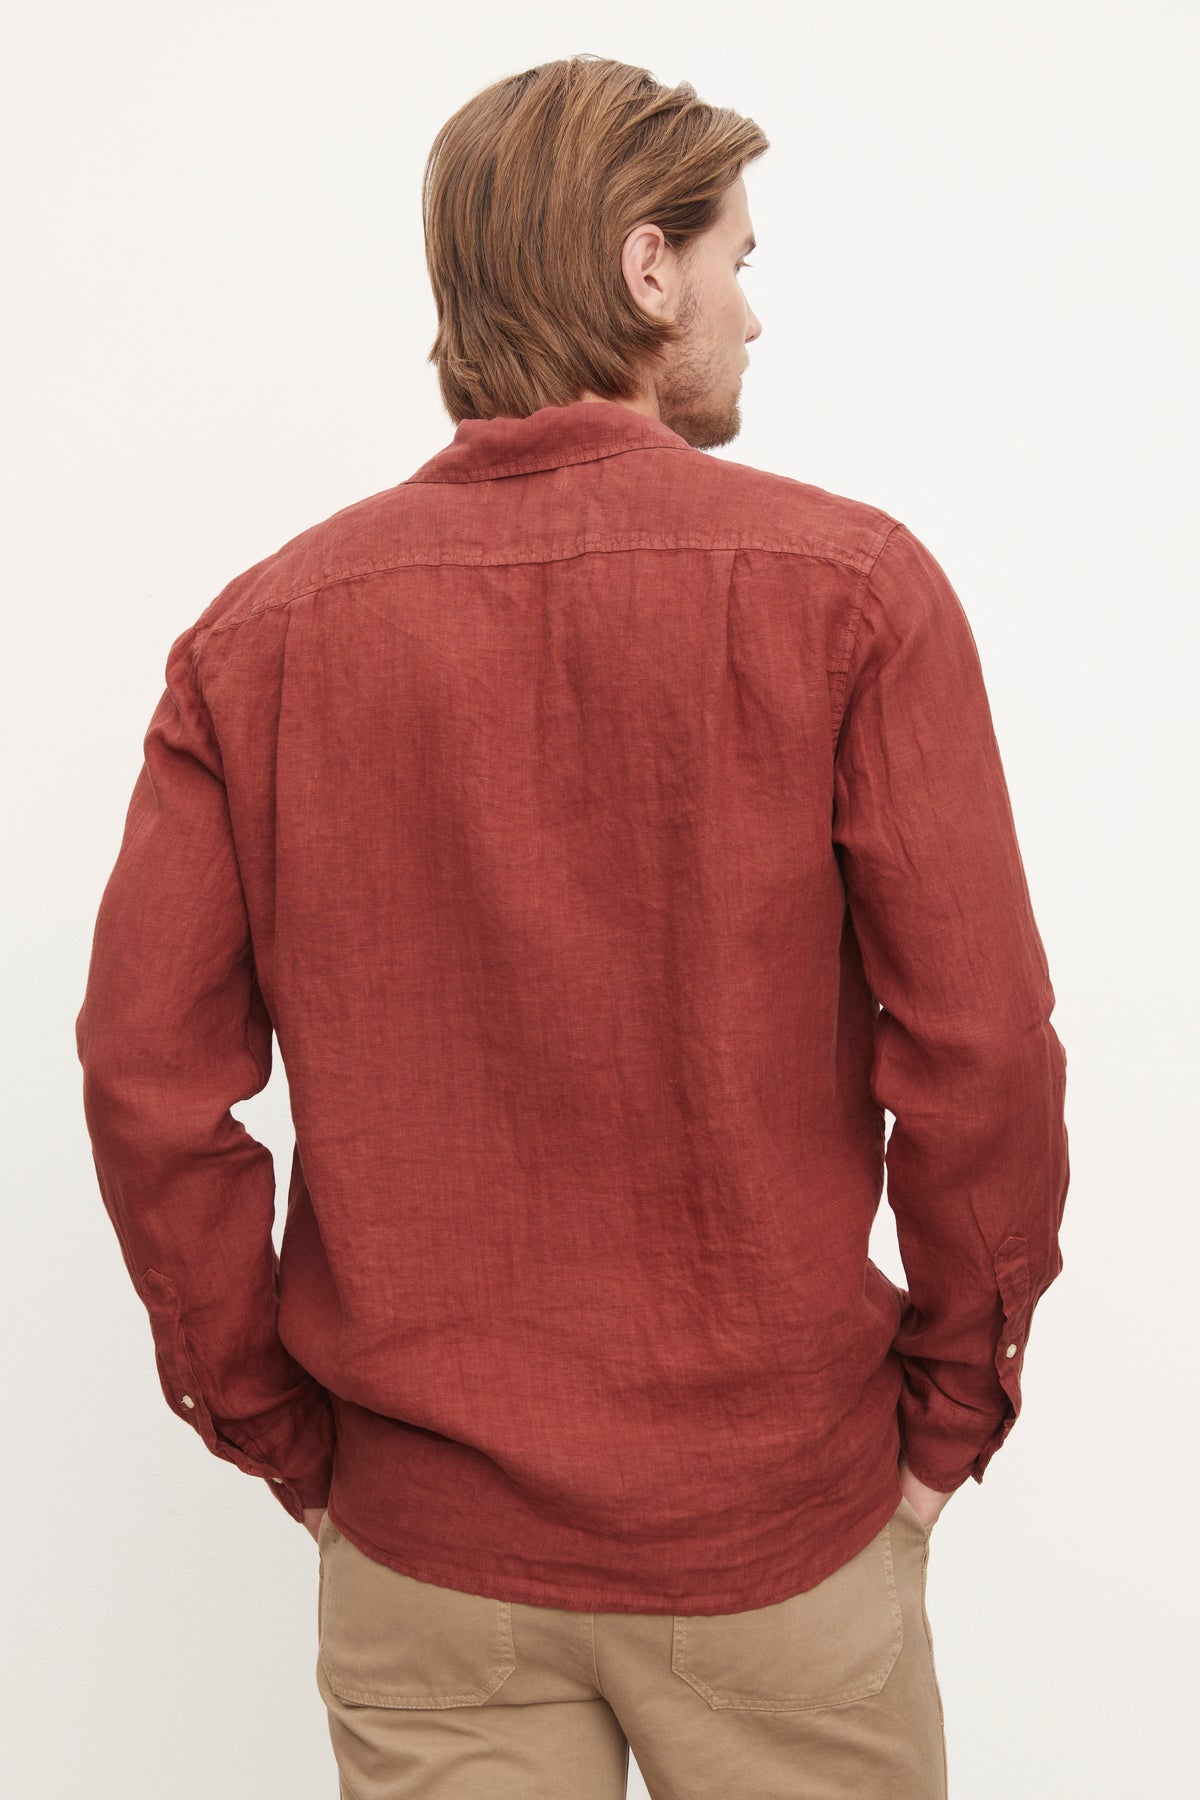 The stylish back view of a man wearing a Velvet by Graham & Spencer BENTON LINEN BUTTON-UP SHIRT.-36009360326849